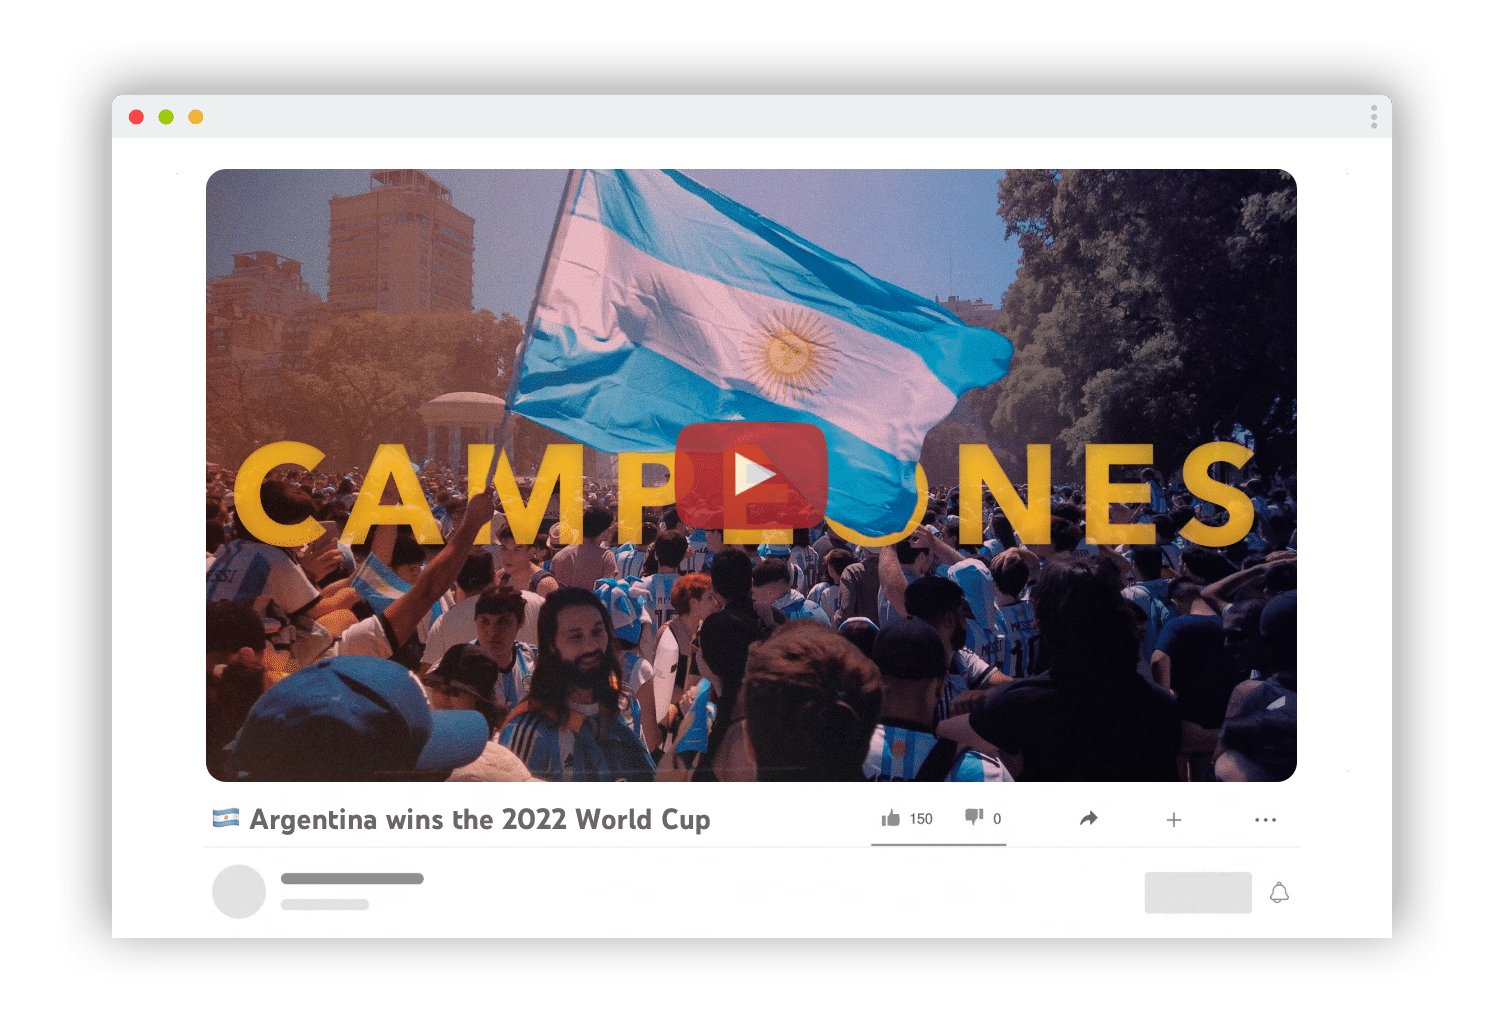 🇦🇷 Argentina wins the 2022 World Cup